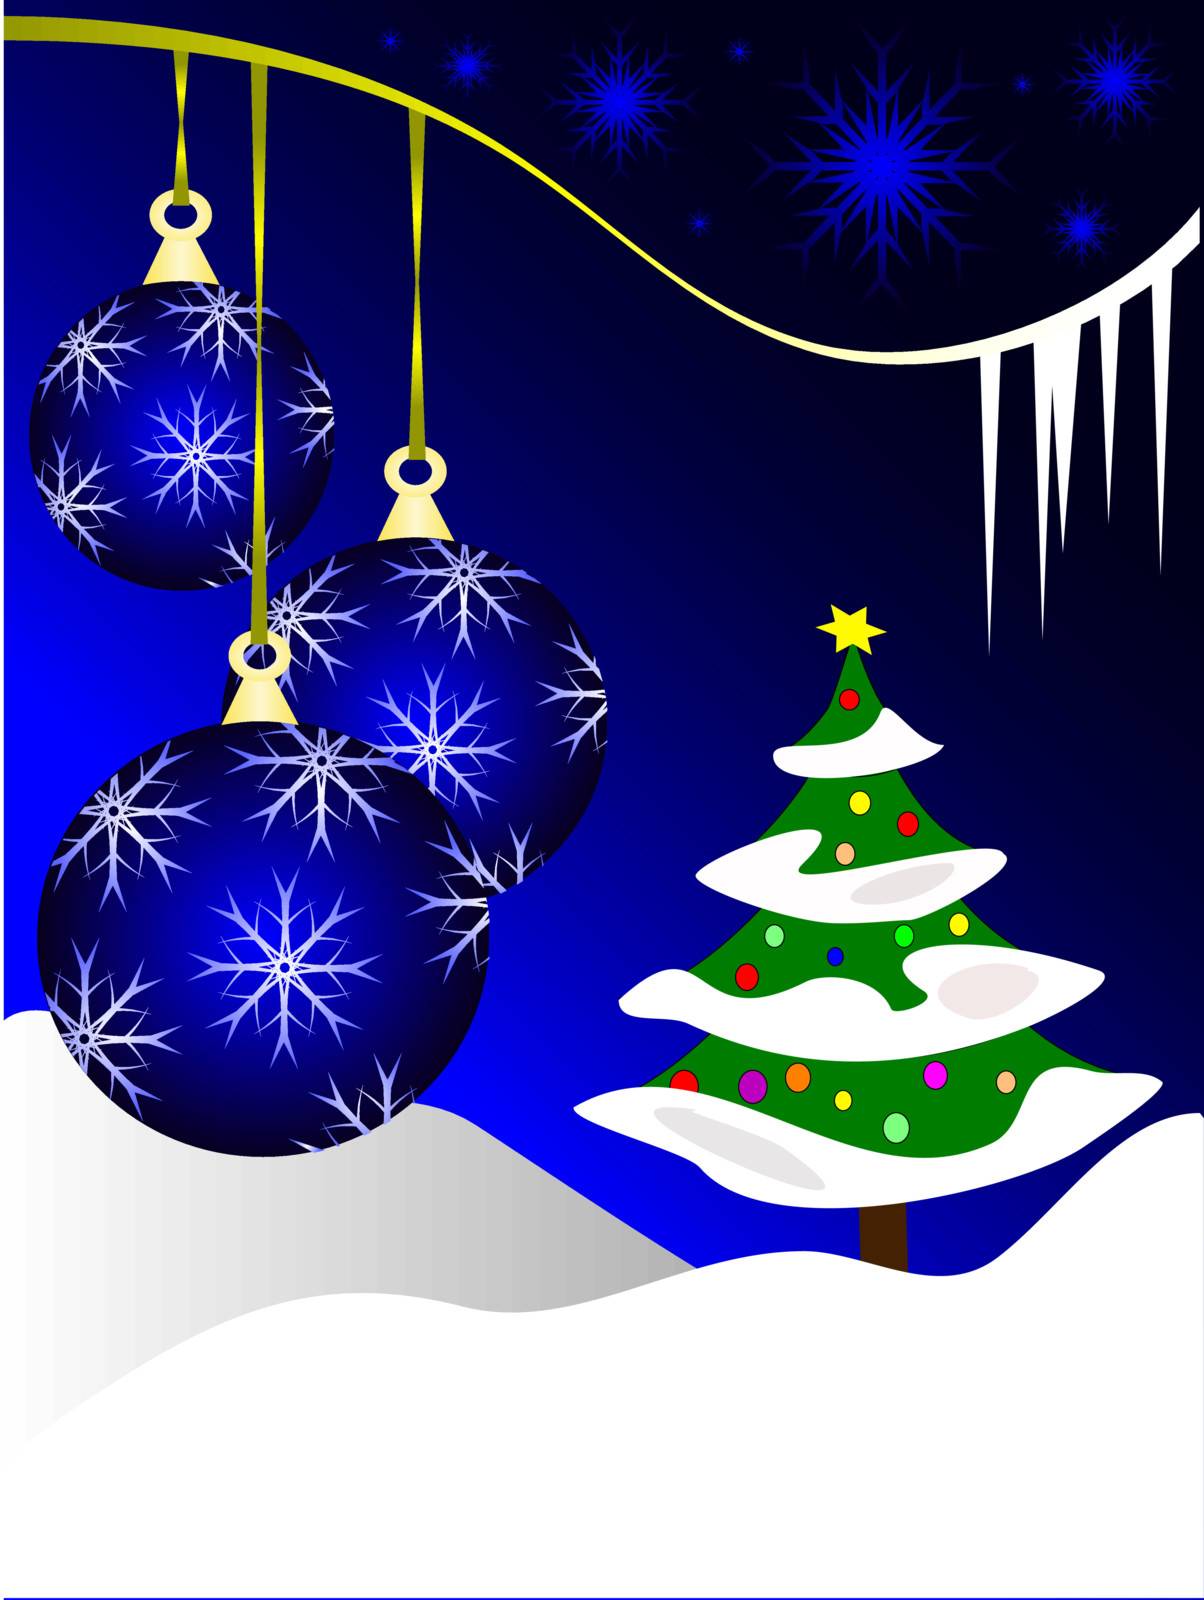 An abstract Christmas vector illustration with blue baubles on a darker backdrop with a white winter scene and room for text